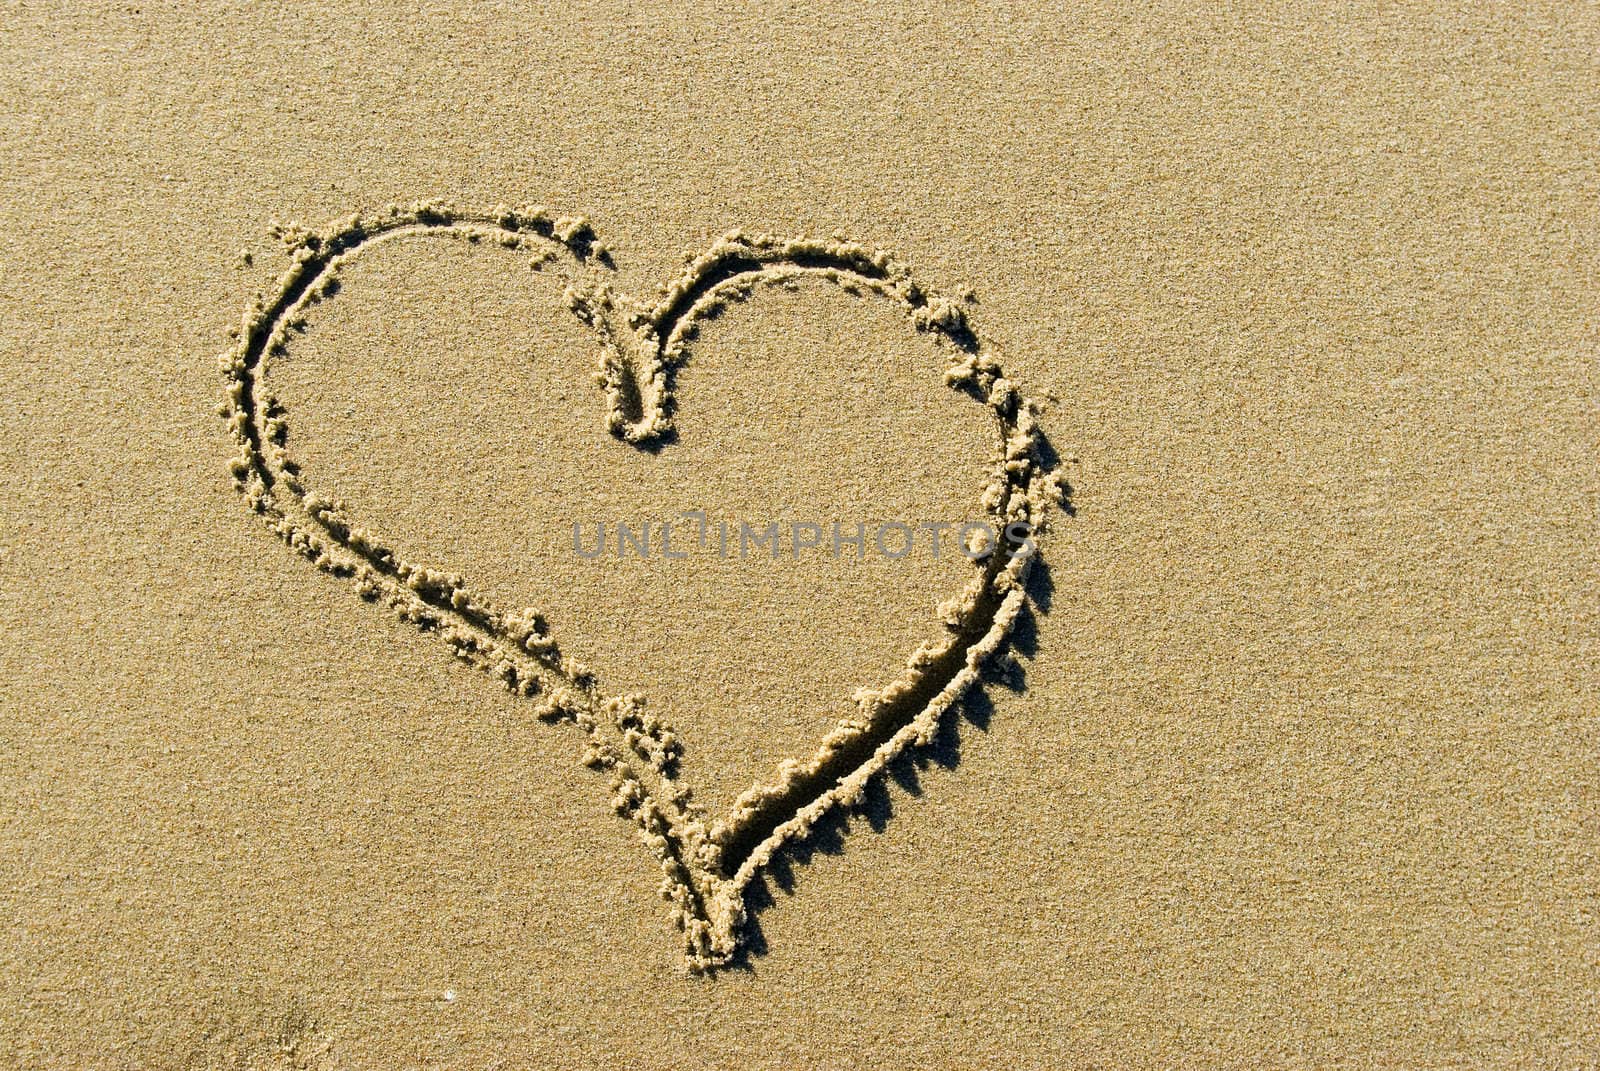 heart on the sand in drowed 